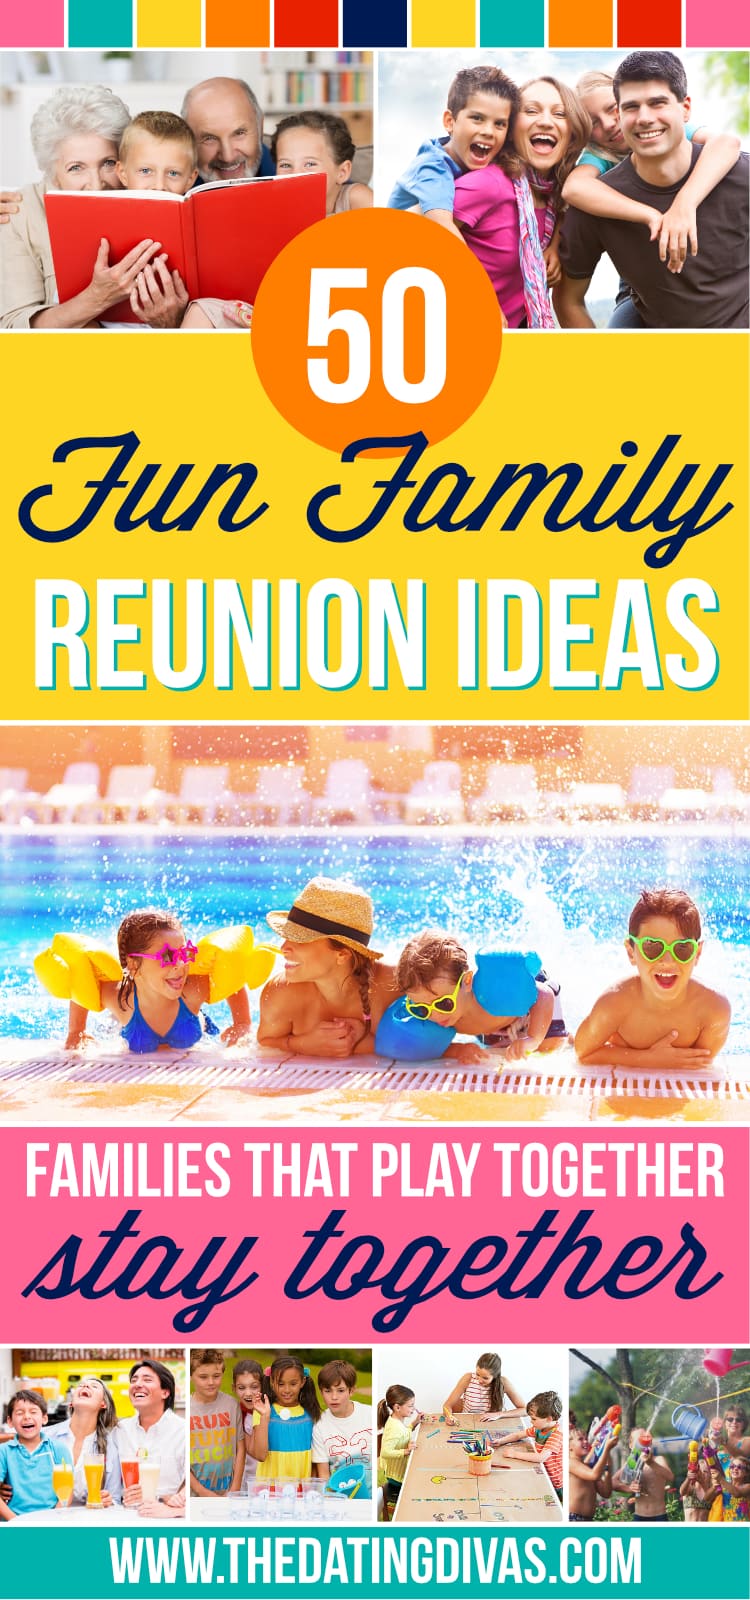 Fun family reunion ideas to make your family get together better than ever! #FamilyReunion #FamilyIsEverything #FamilyReunionGames